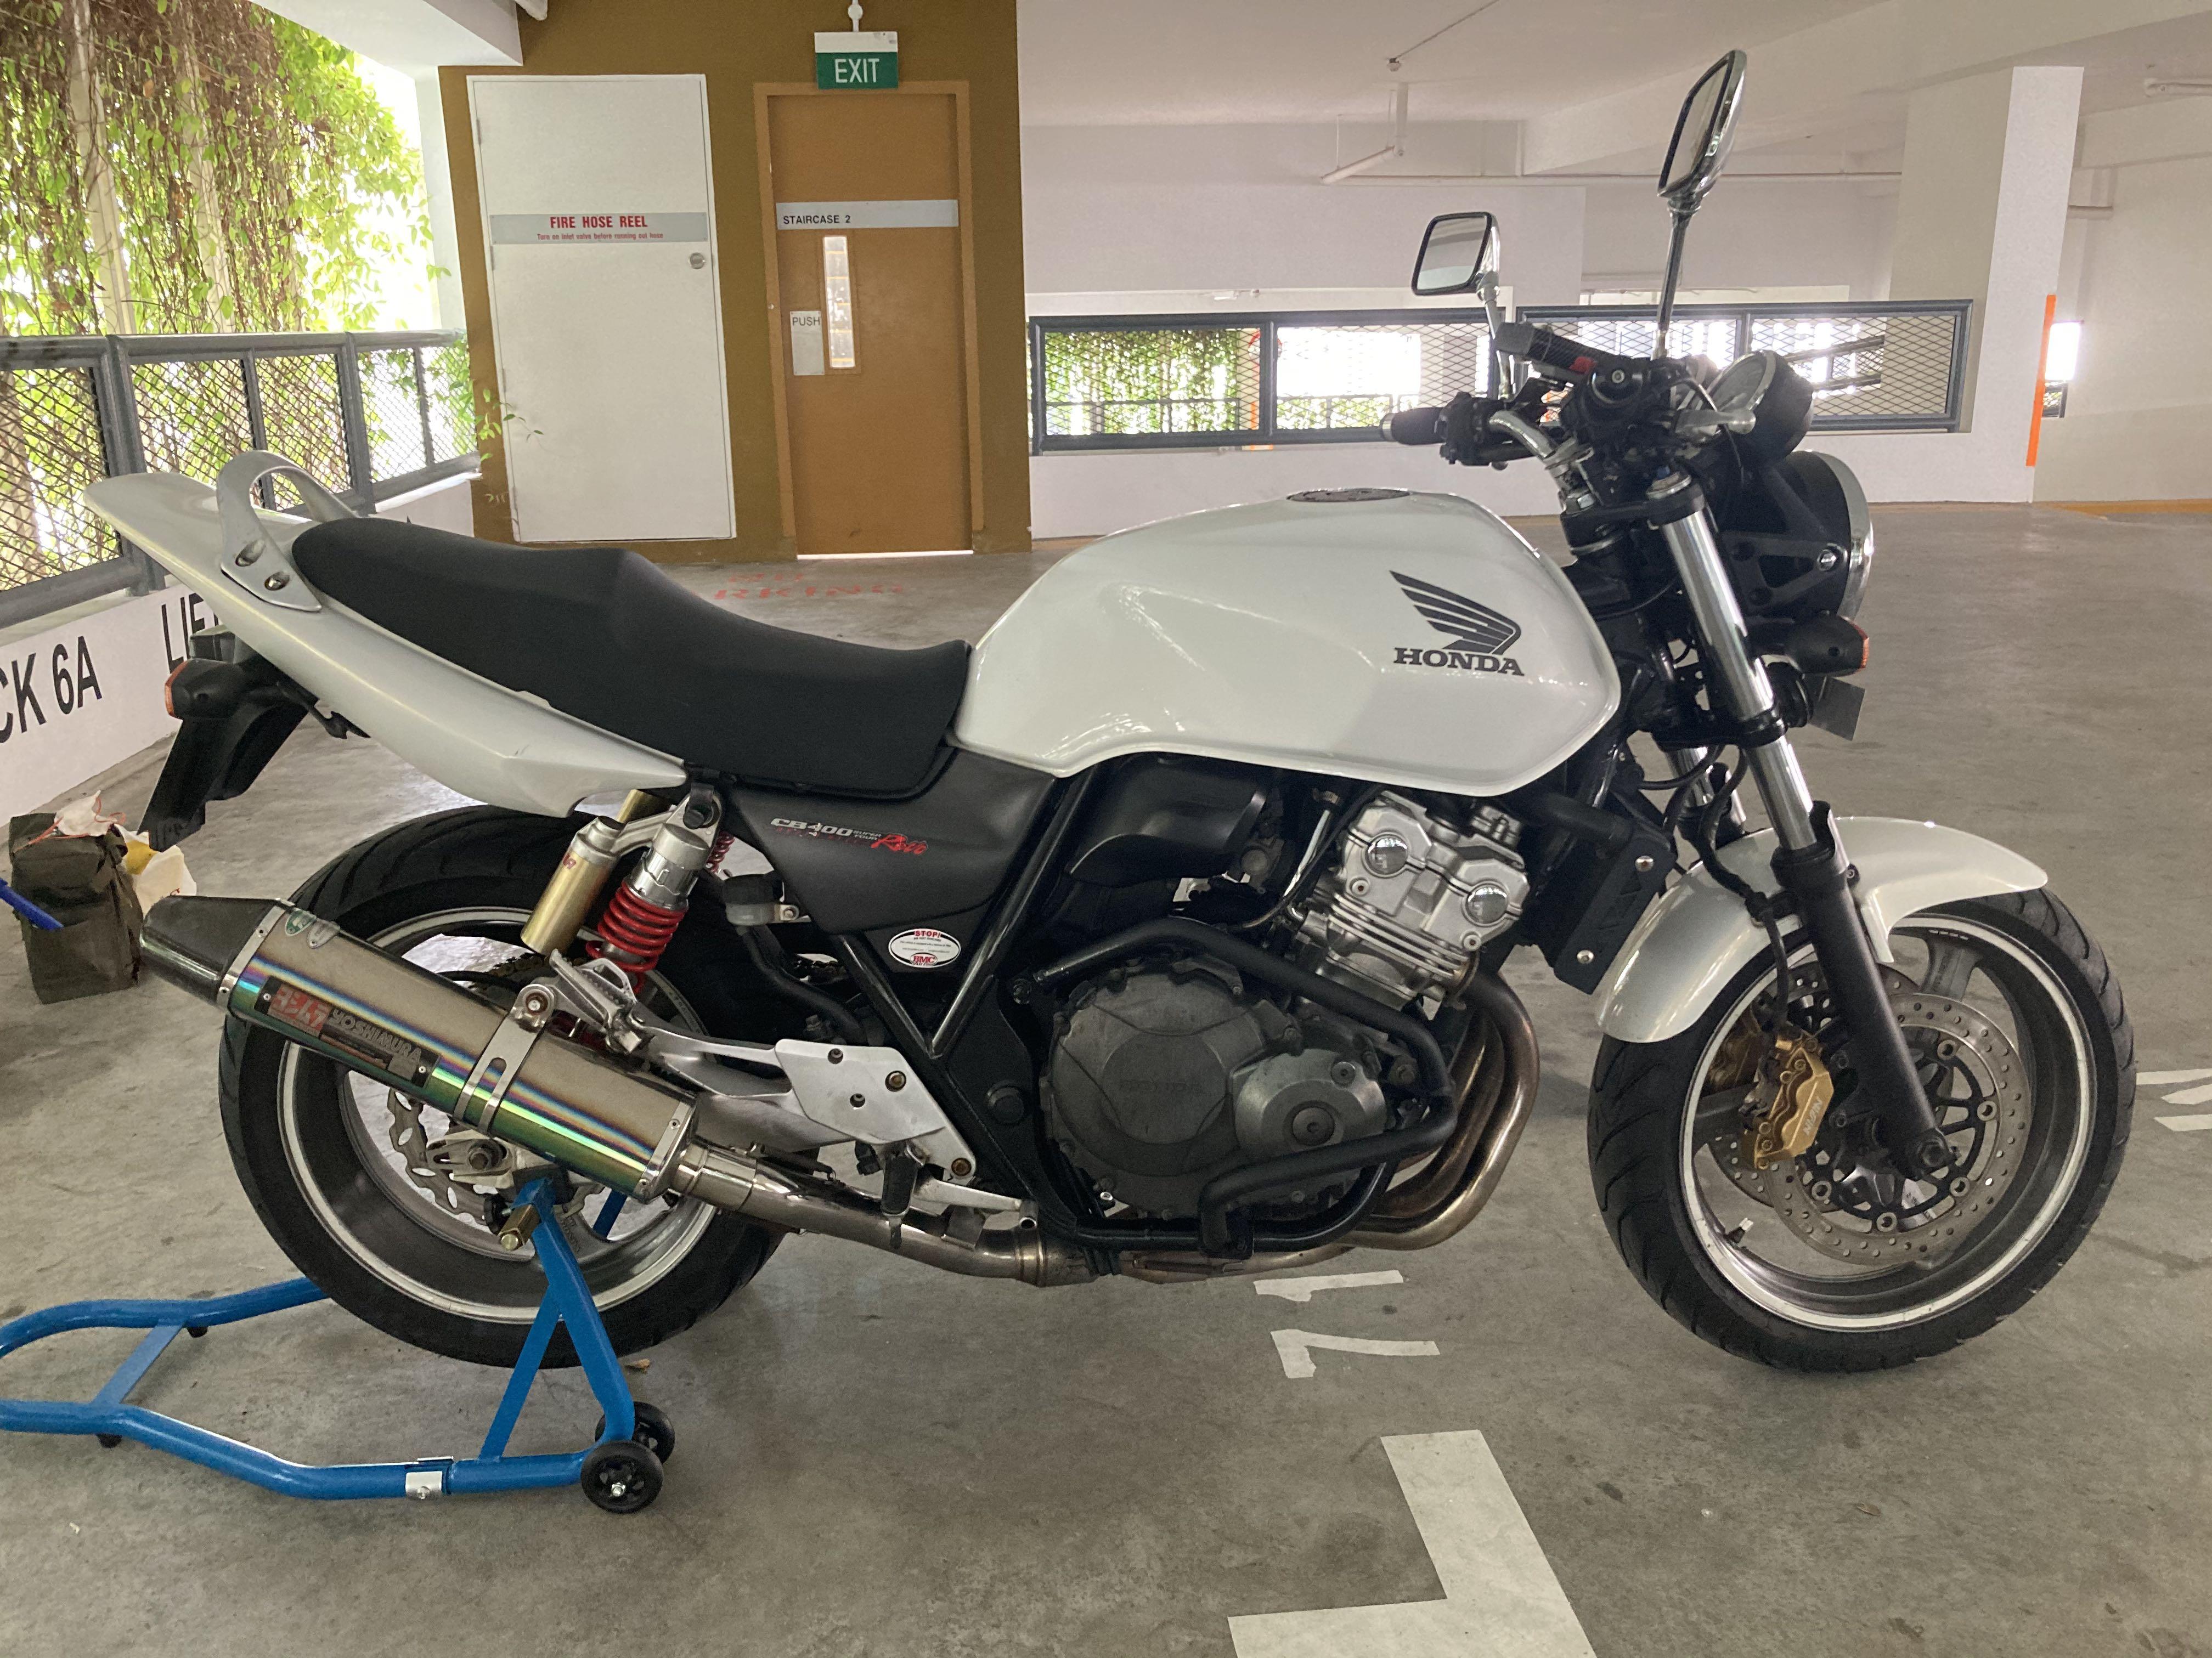 Wtt Wts Honda Cb400 Revo 08 Motorcycles Motorcycles For Sale Class 2a On Carousell